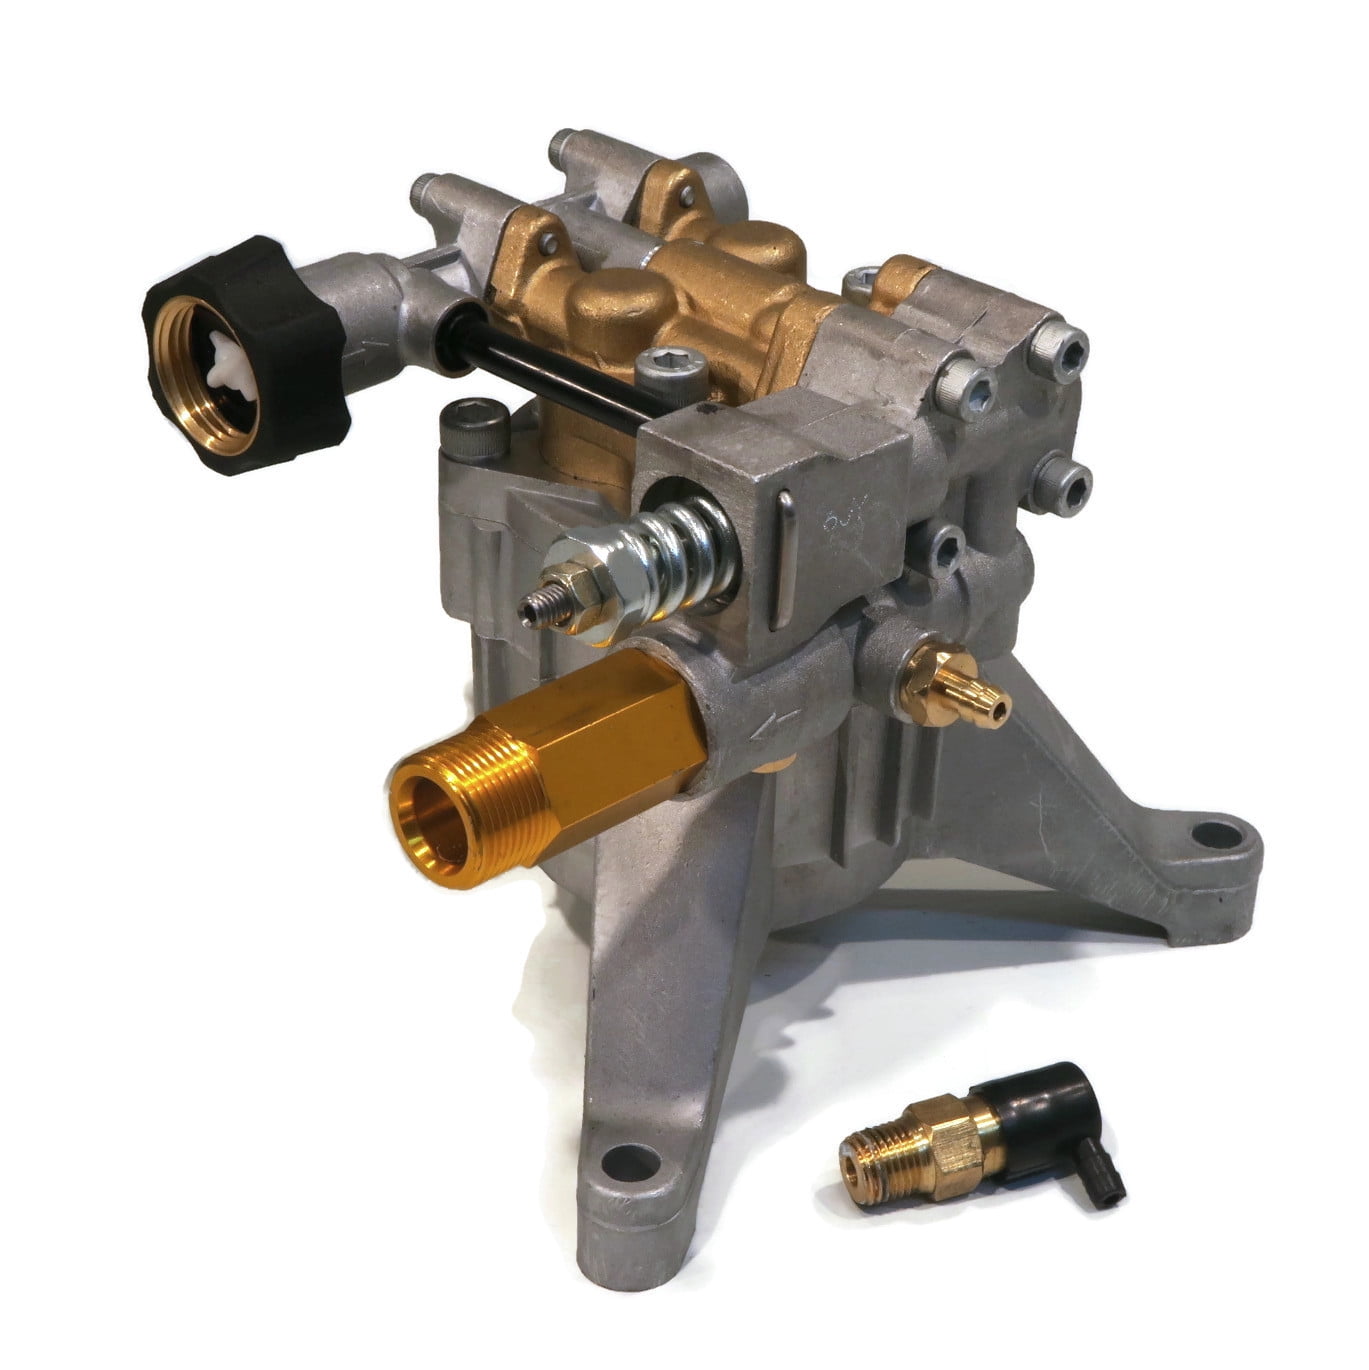 Details about   FREE QUICK ADAPTERS PRESSURE WASHER PUMP EXCELL DEVILBISS VERT DELTA DT2400CS 